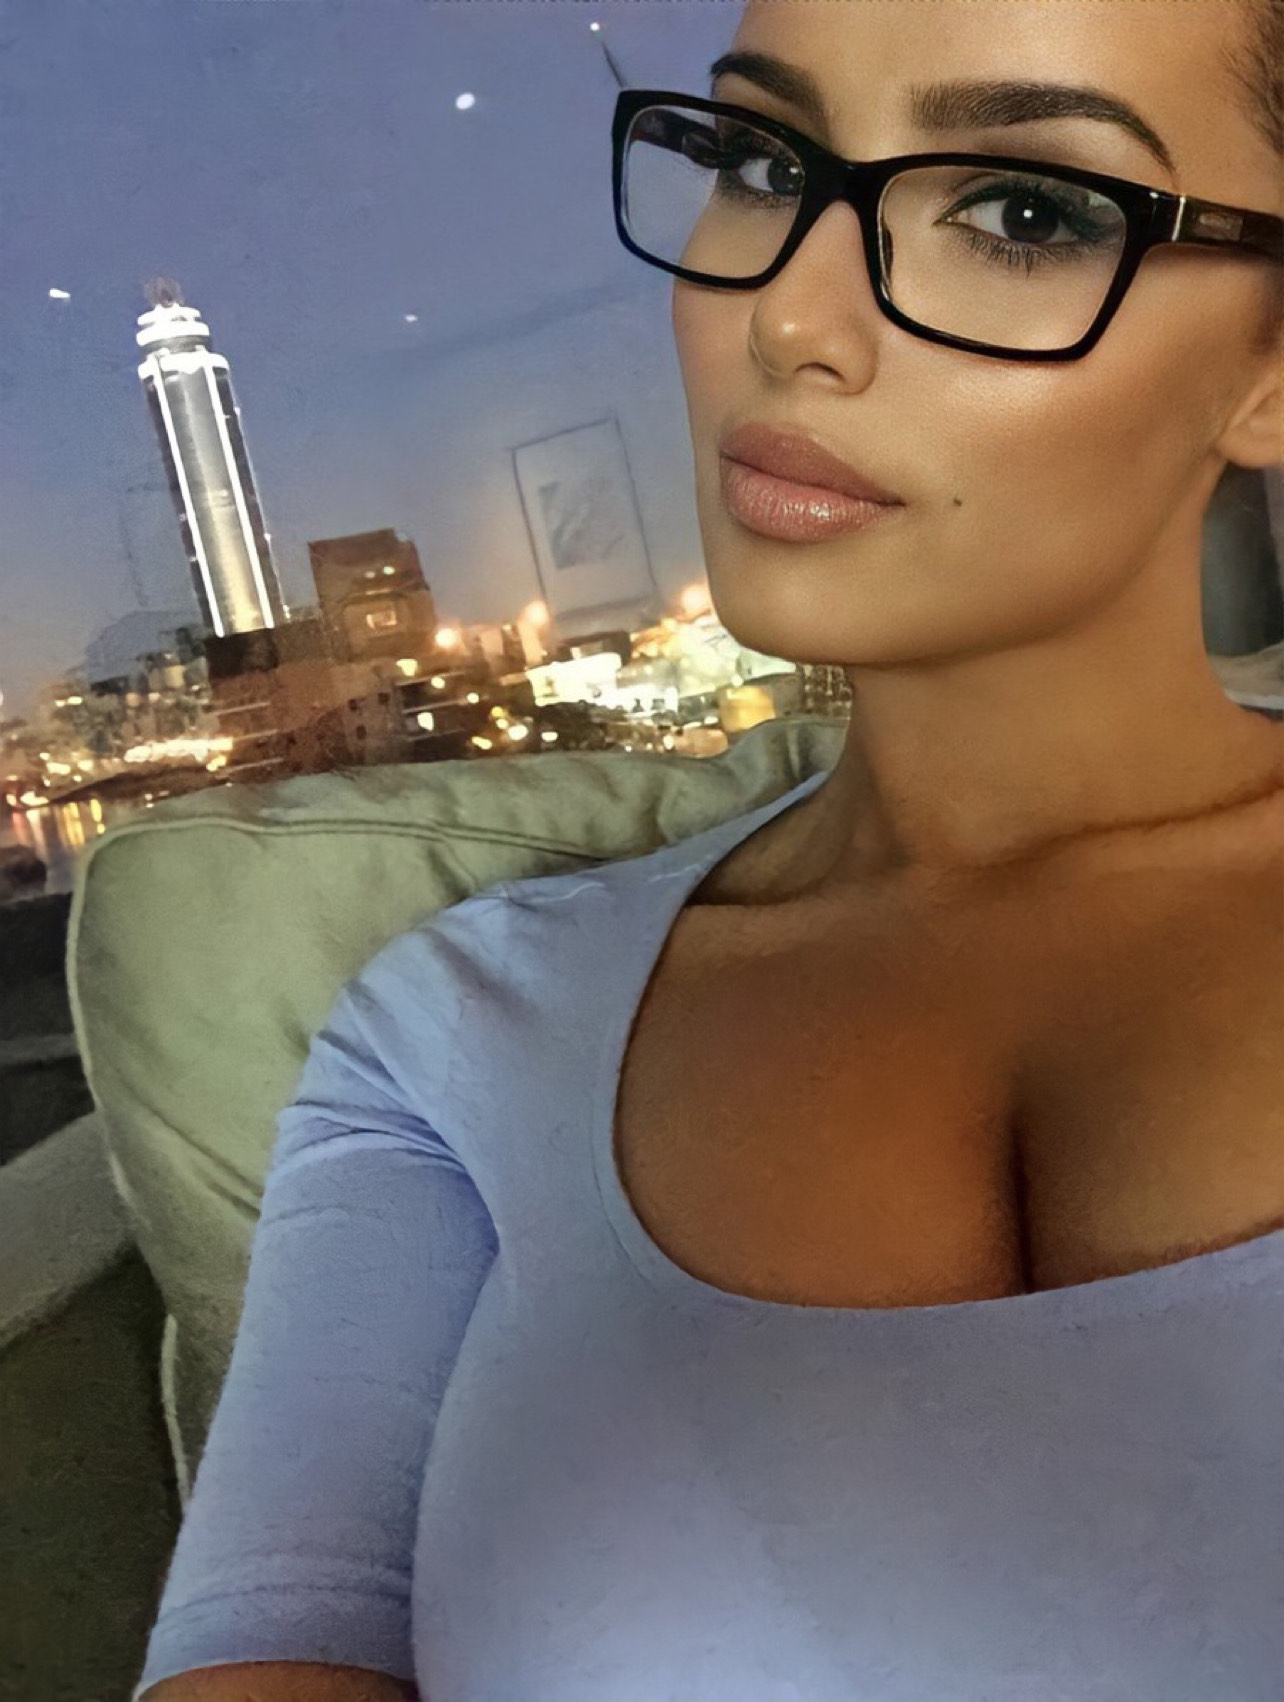 Busty Girls With Glasses